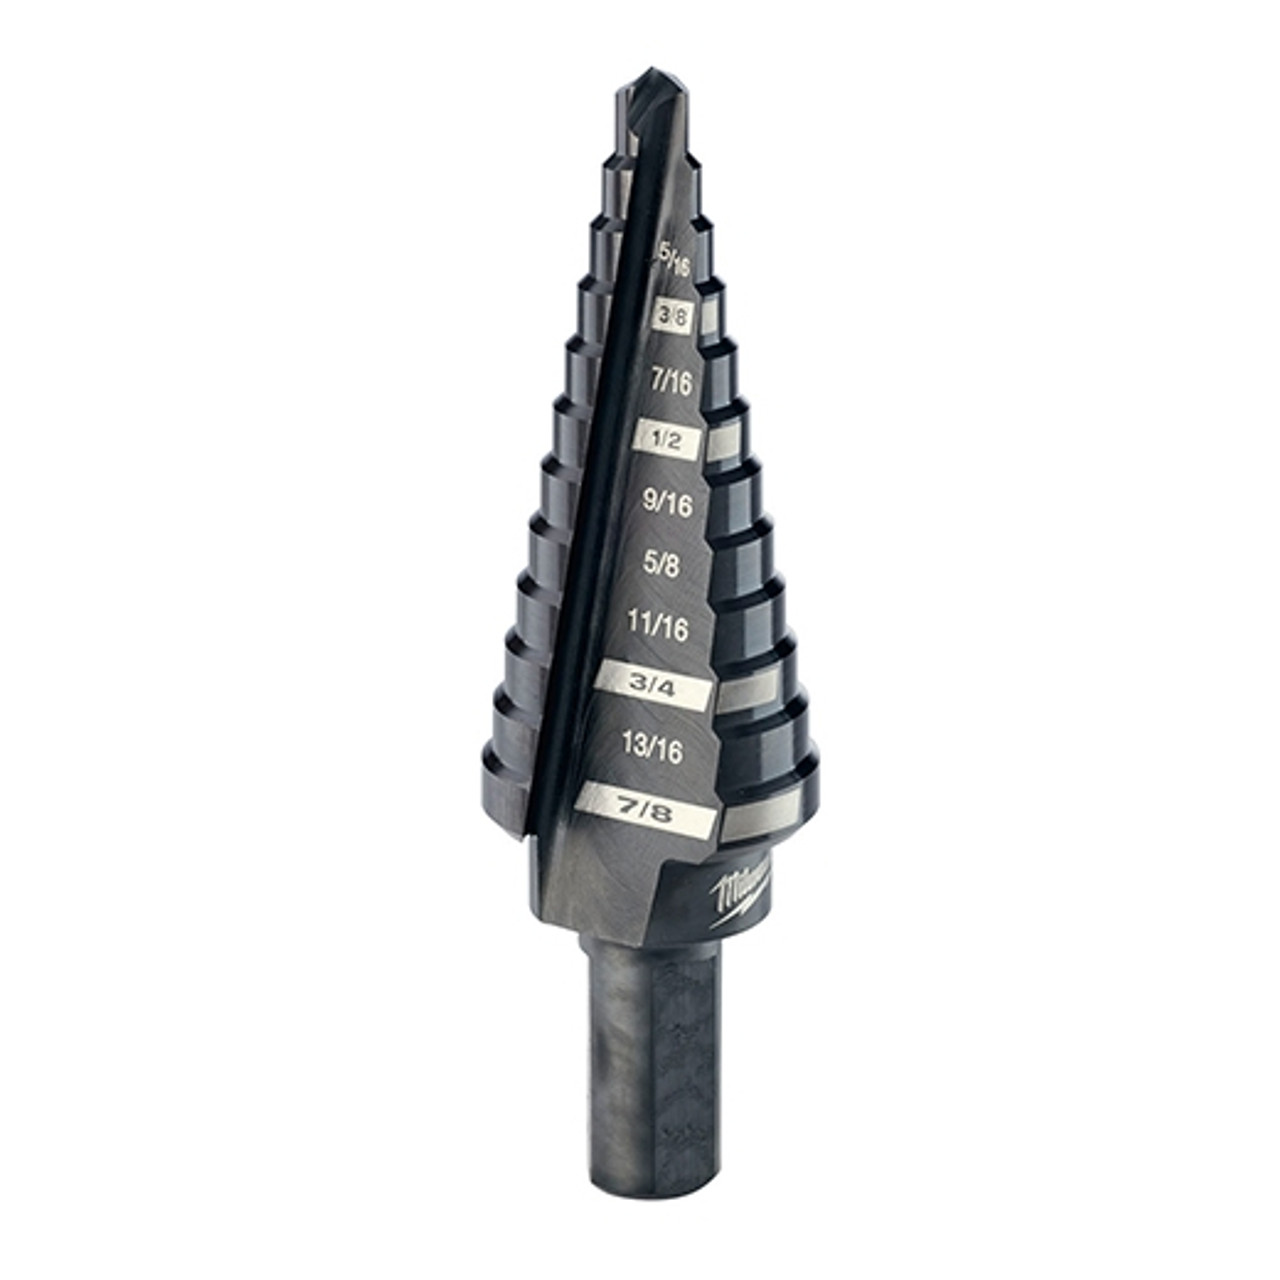 Milwaukee 48-89-9204 #4 Step Drill Bit, 3/16 in. - 7/8 in. by 1/16 in.